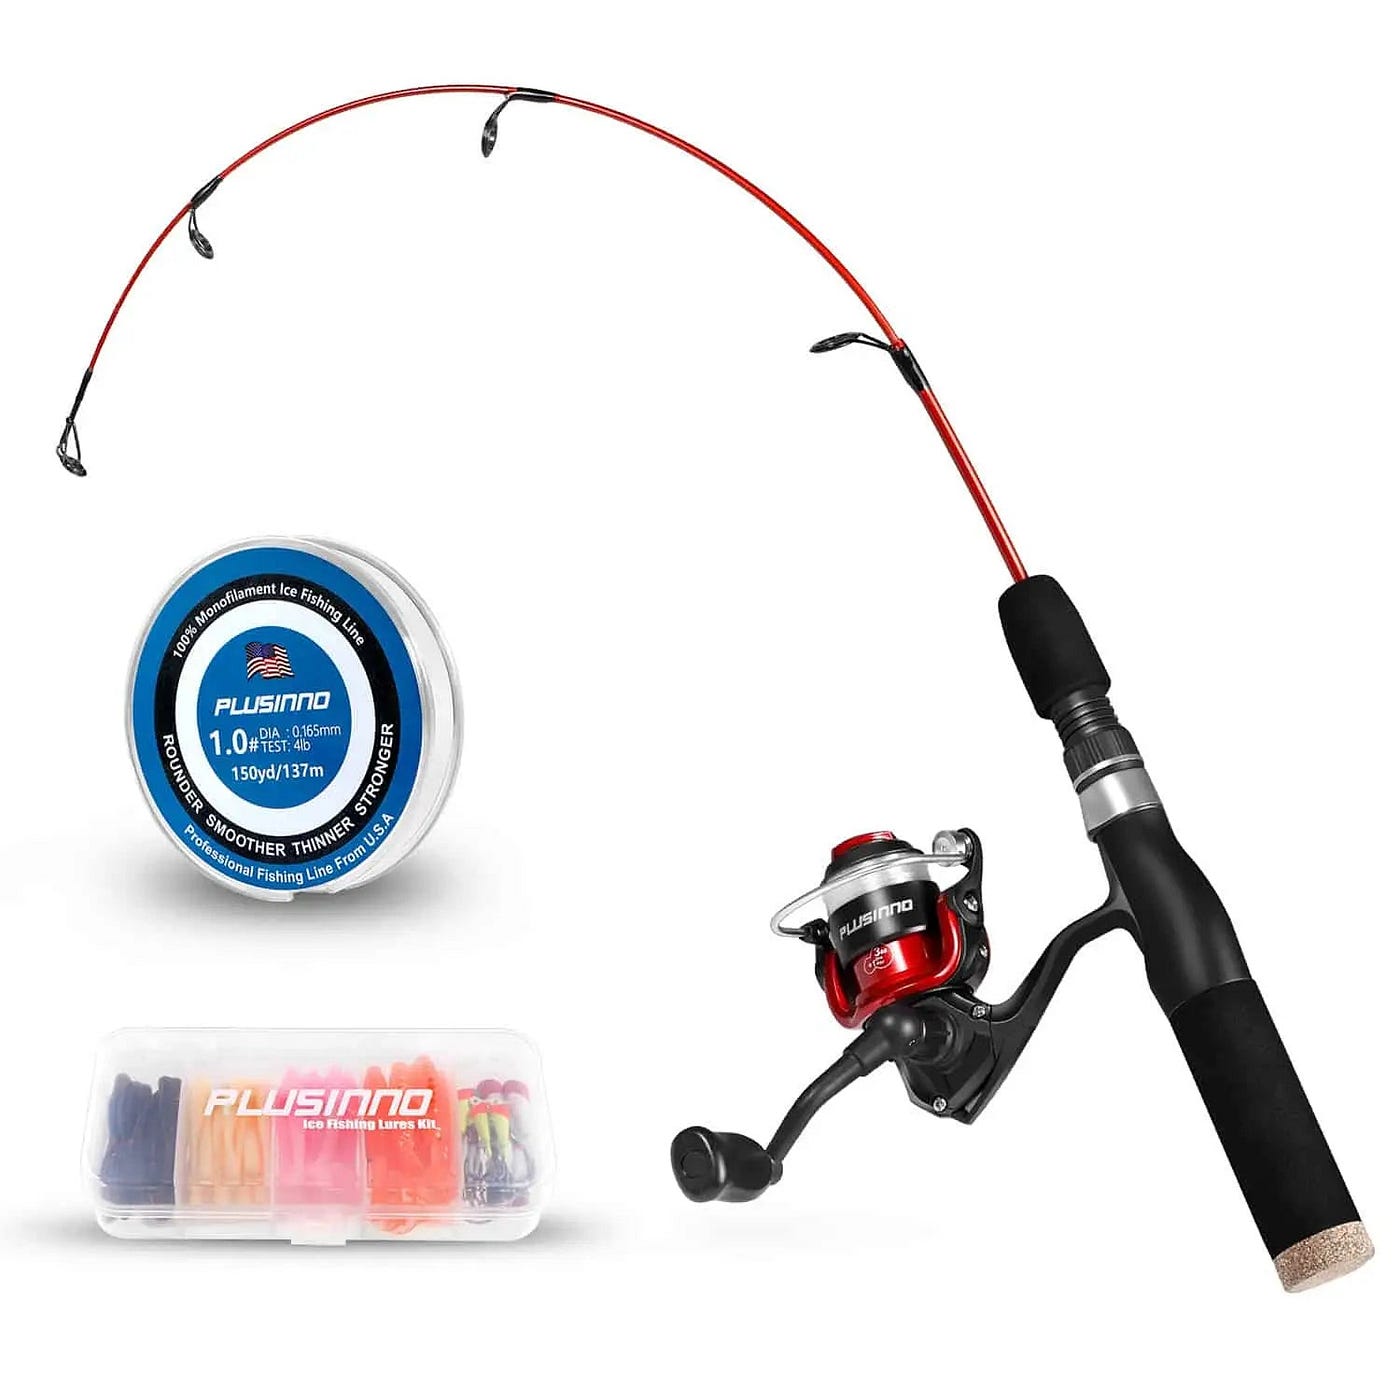 Why You Should Get Your Kids a Kiddie Fishing Pole for Their Next